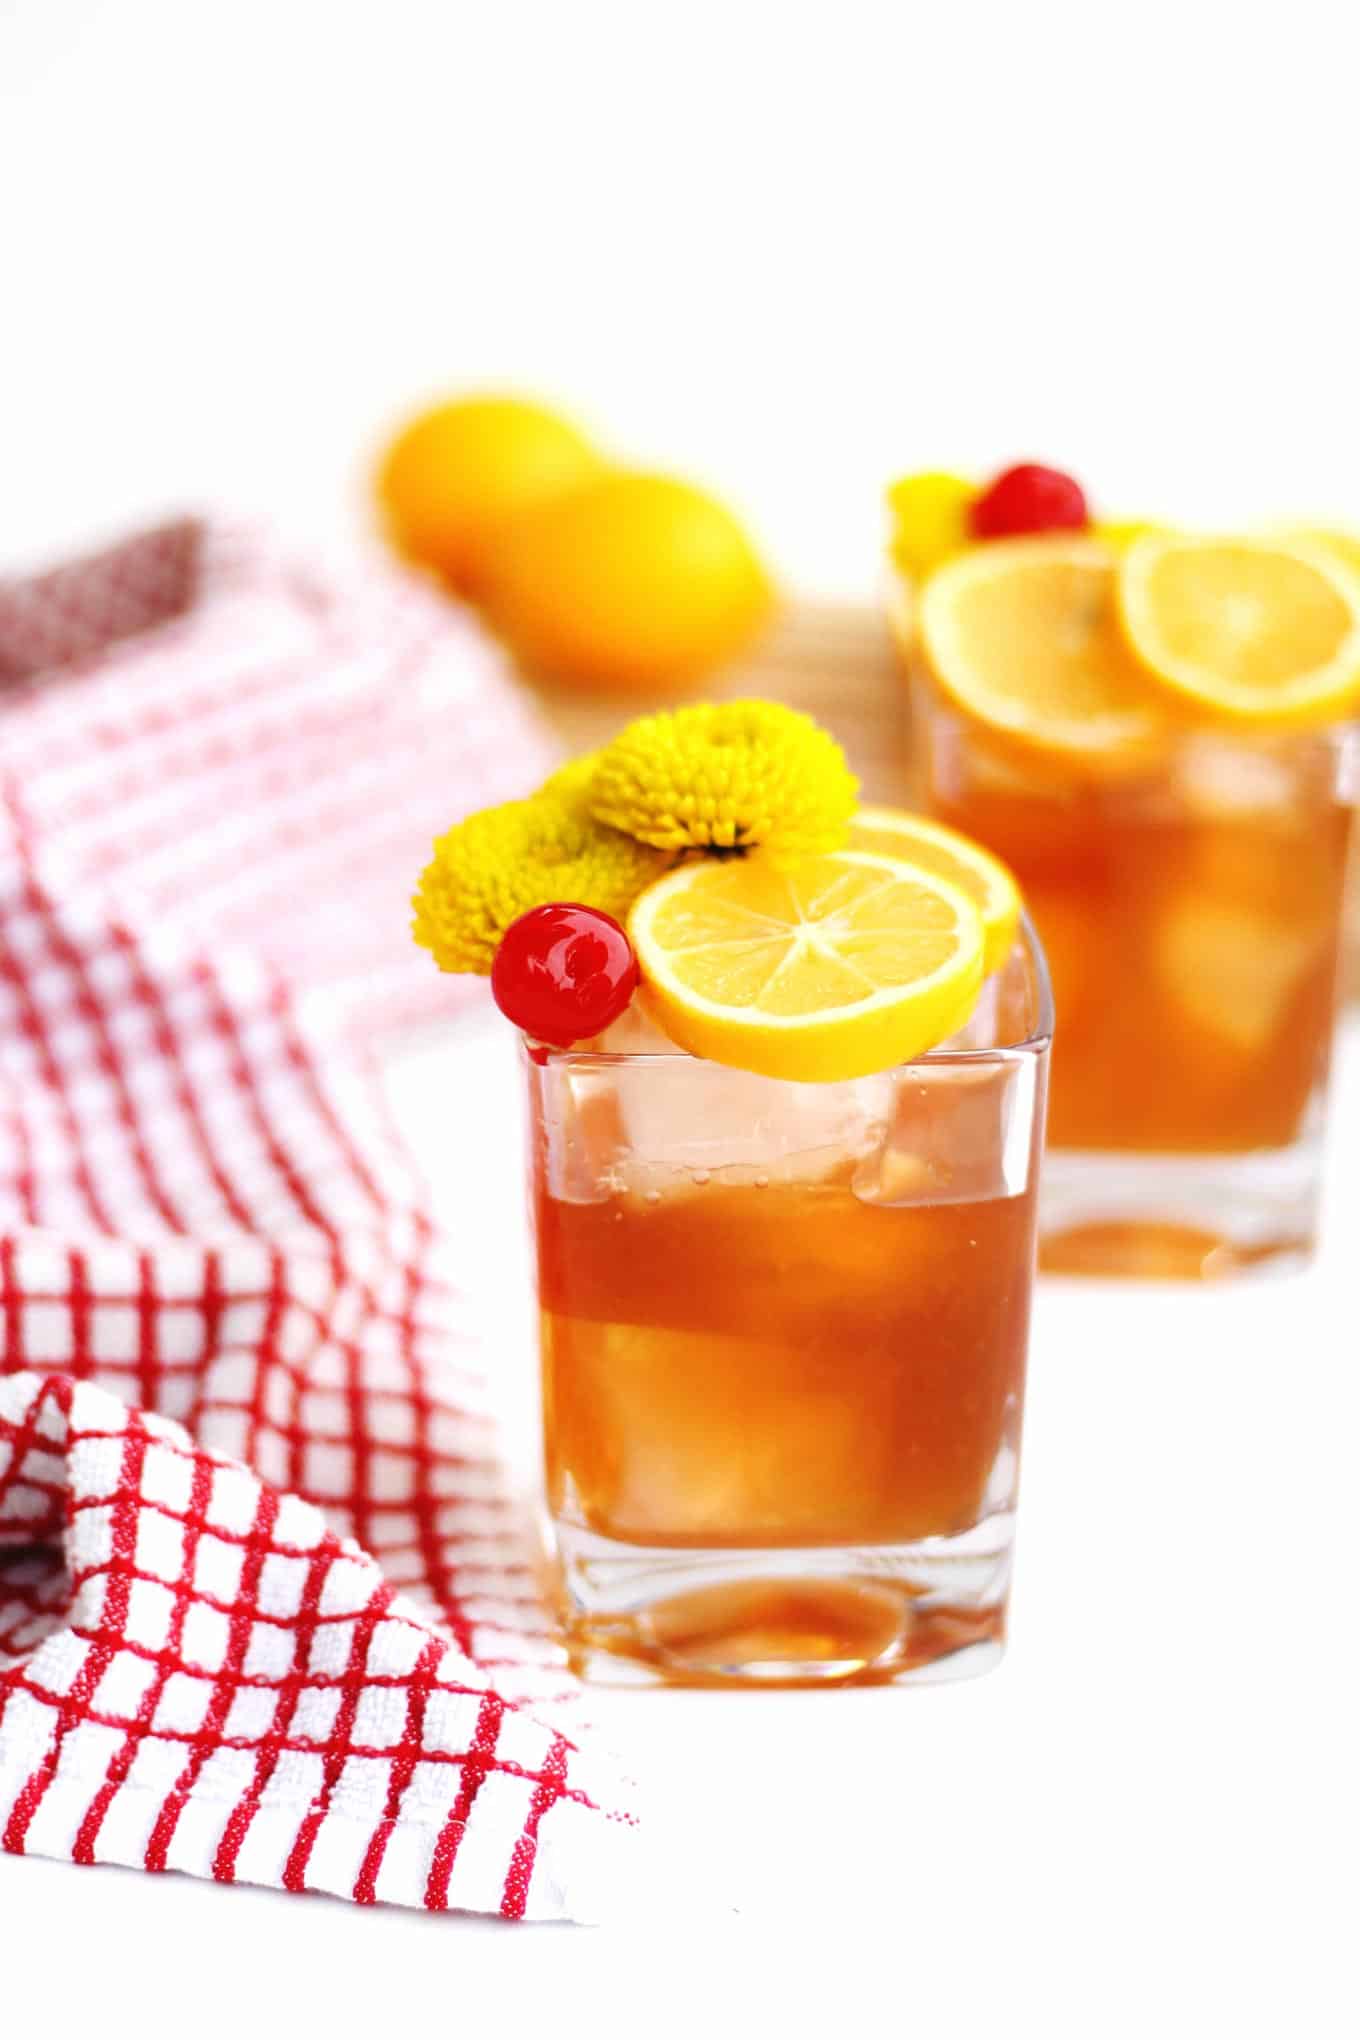 A photo of a lemon old fashioned with lemon slices, maraschino cherry, and yellow flowers on top.